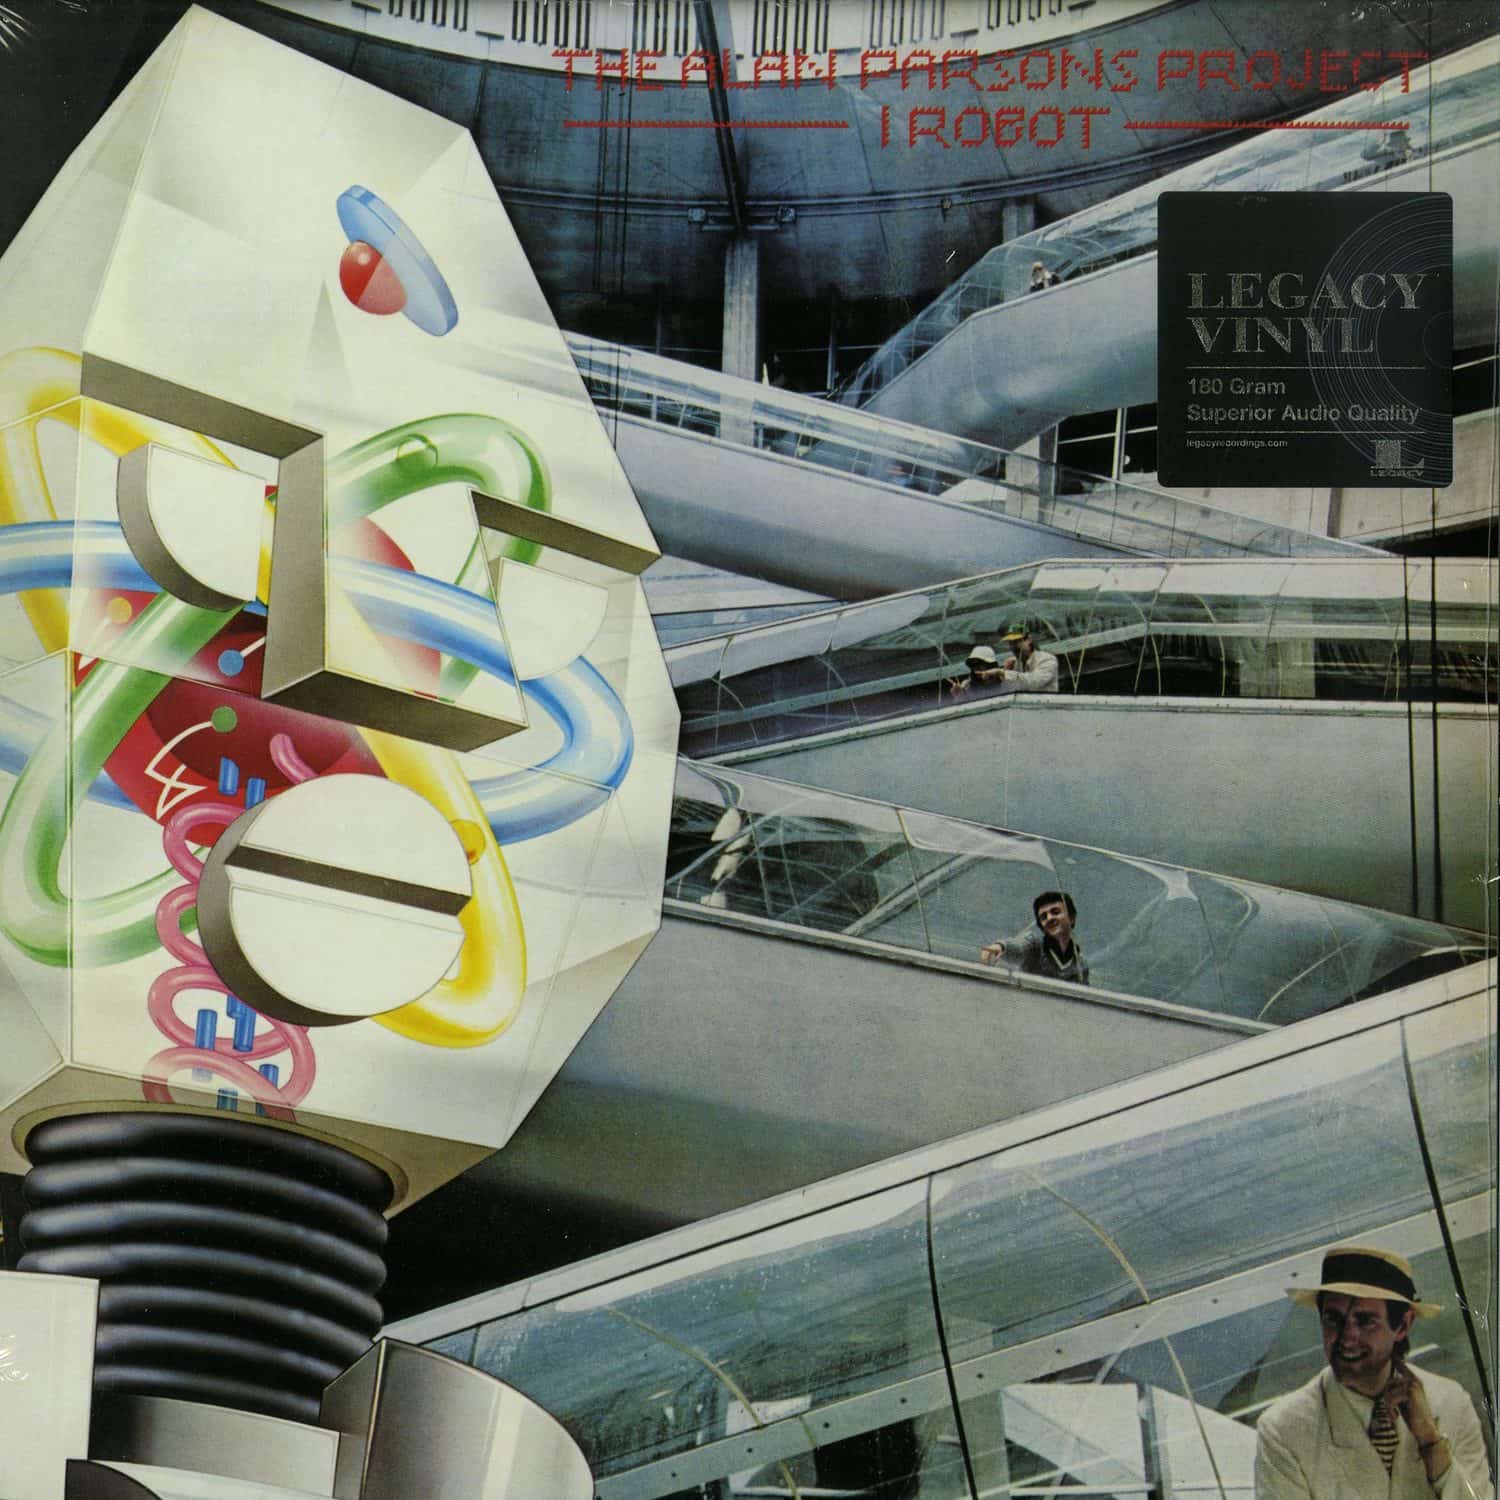 The Alan Parsons Project - I ROBOT 